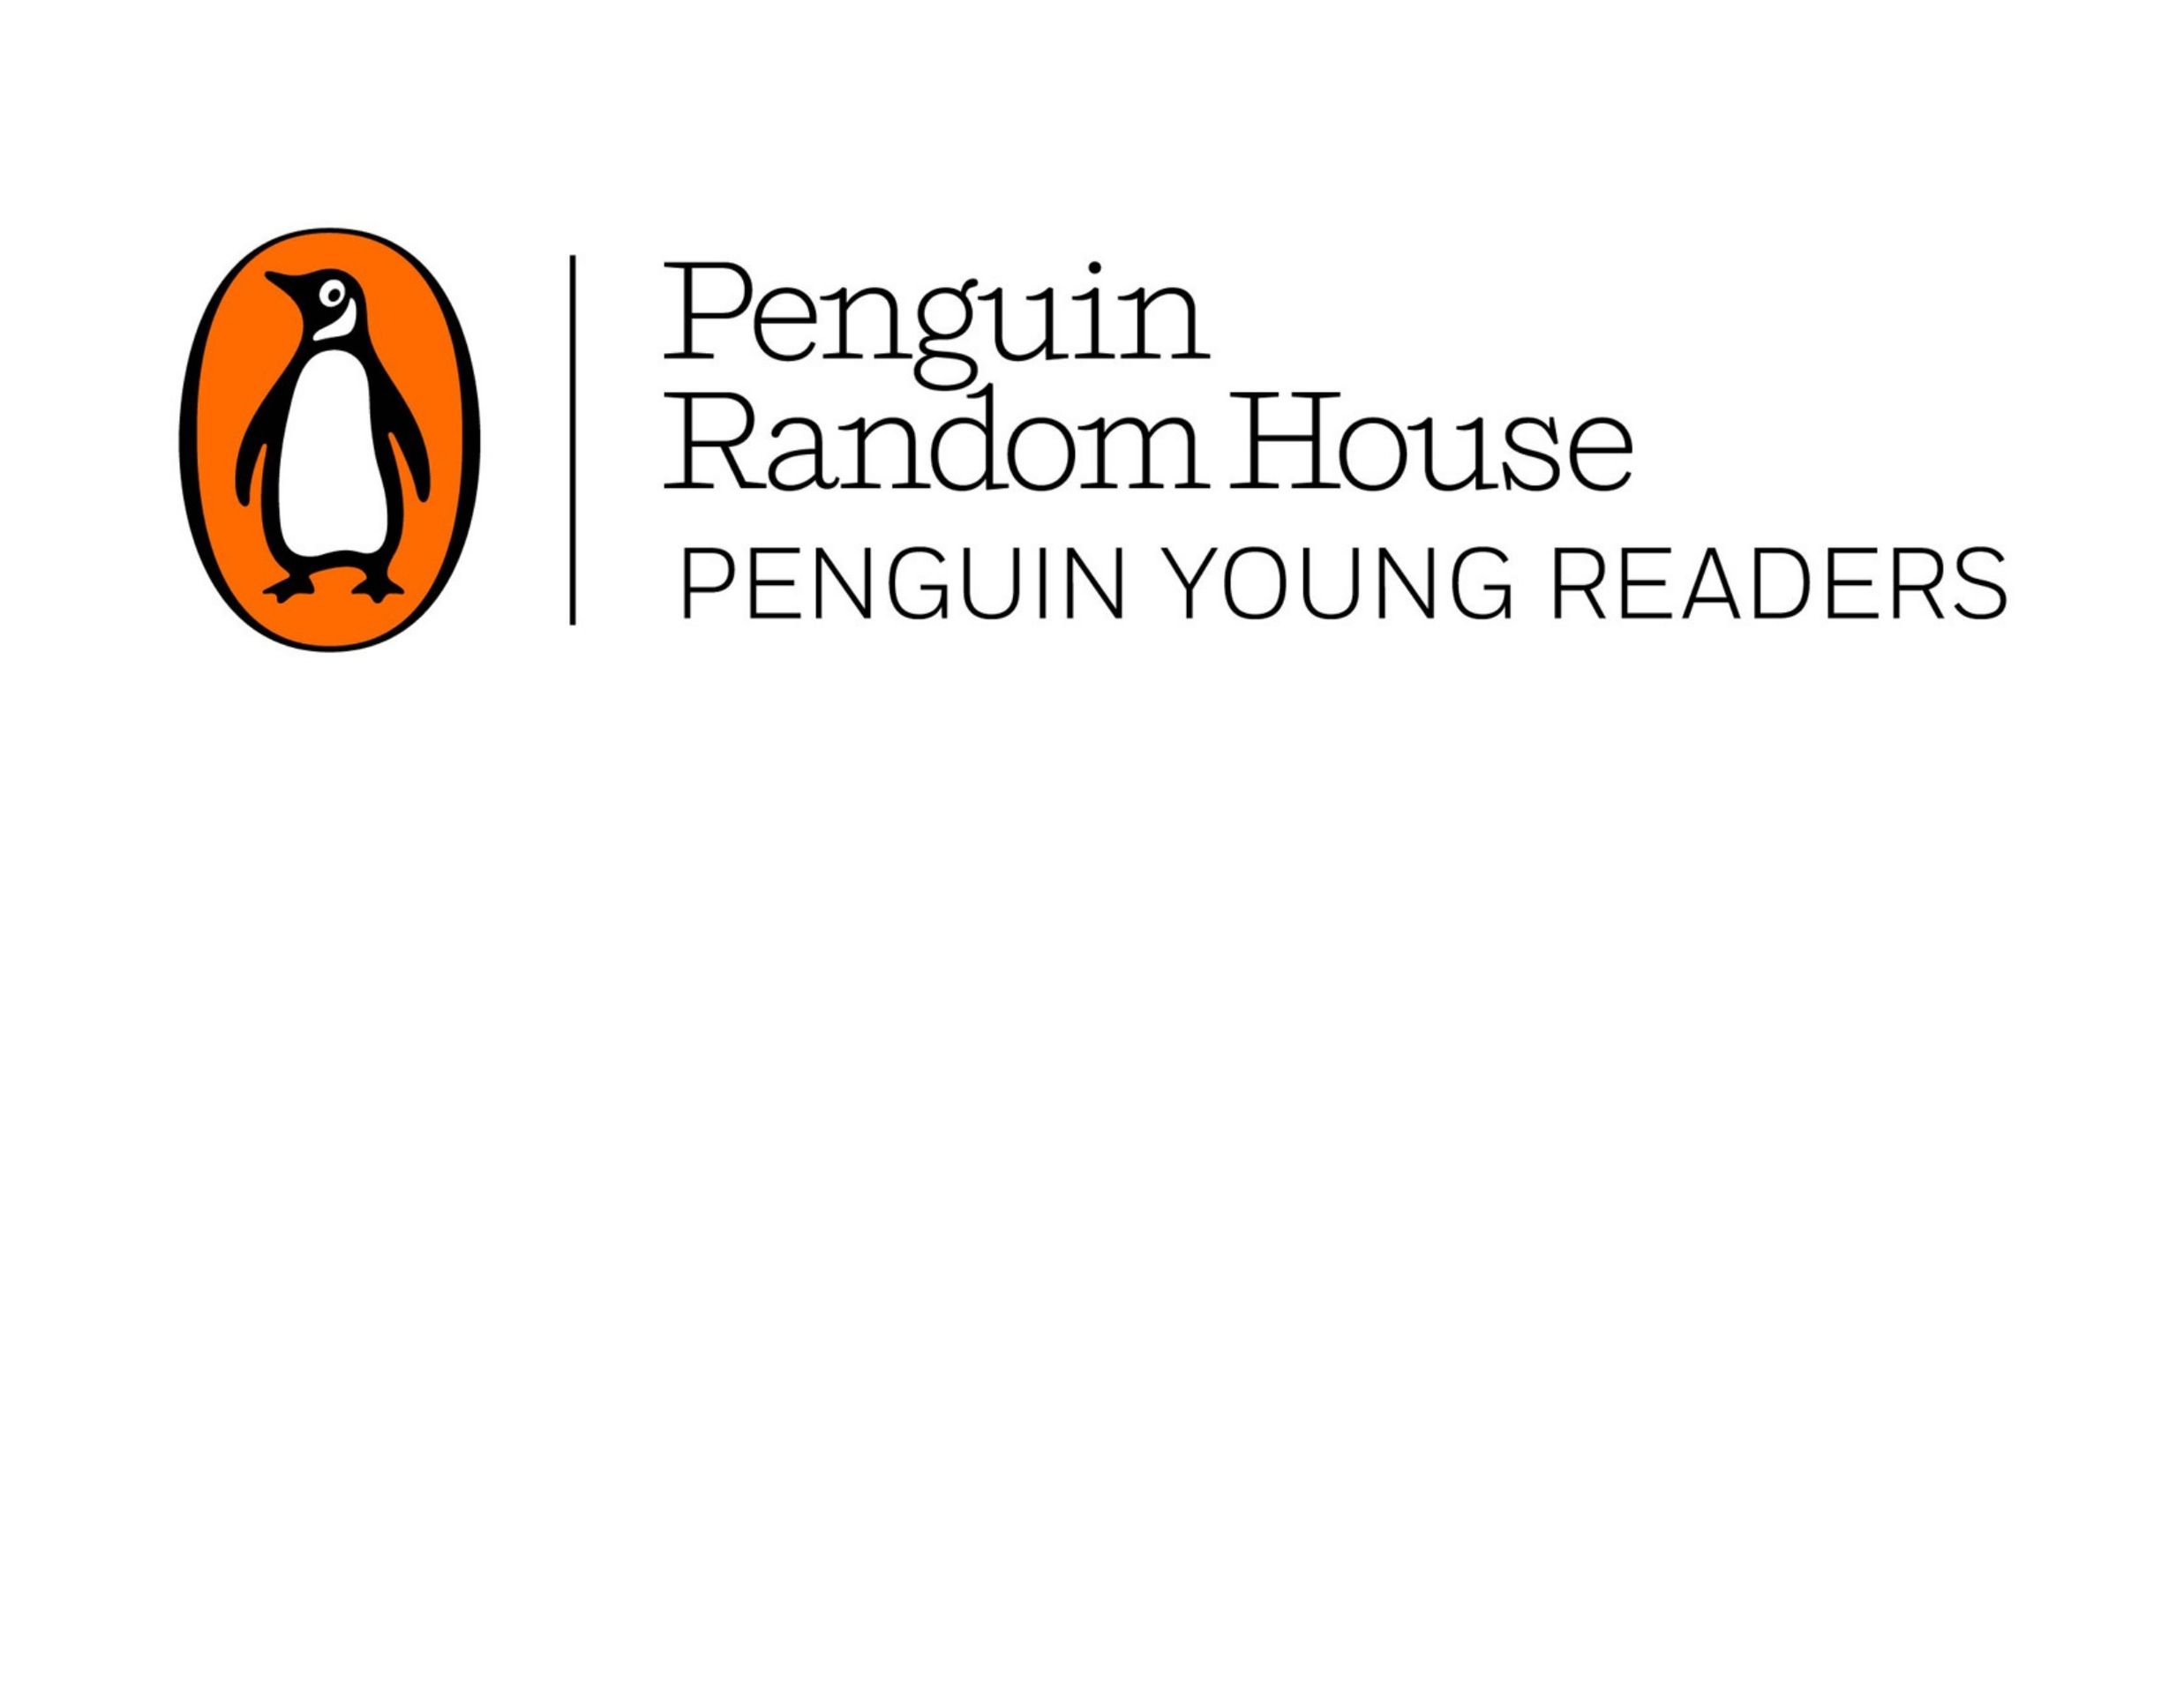 Penguin Young Readers Image